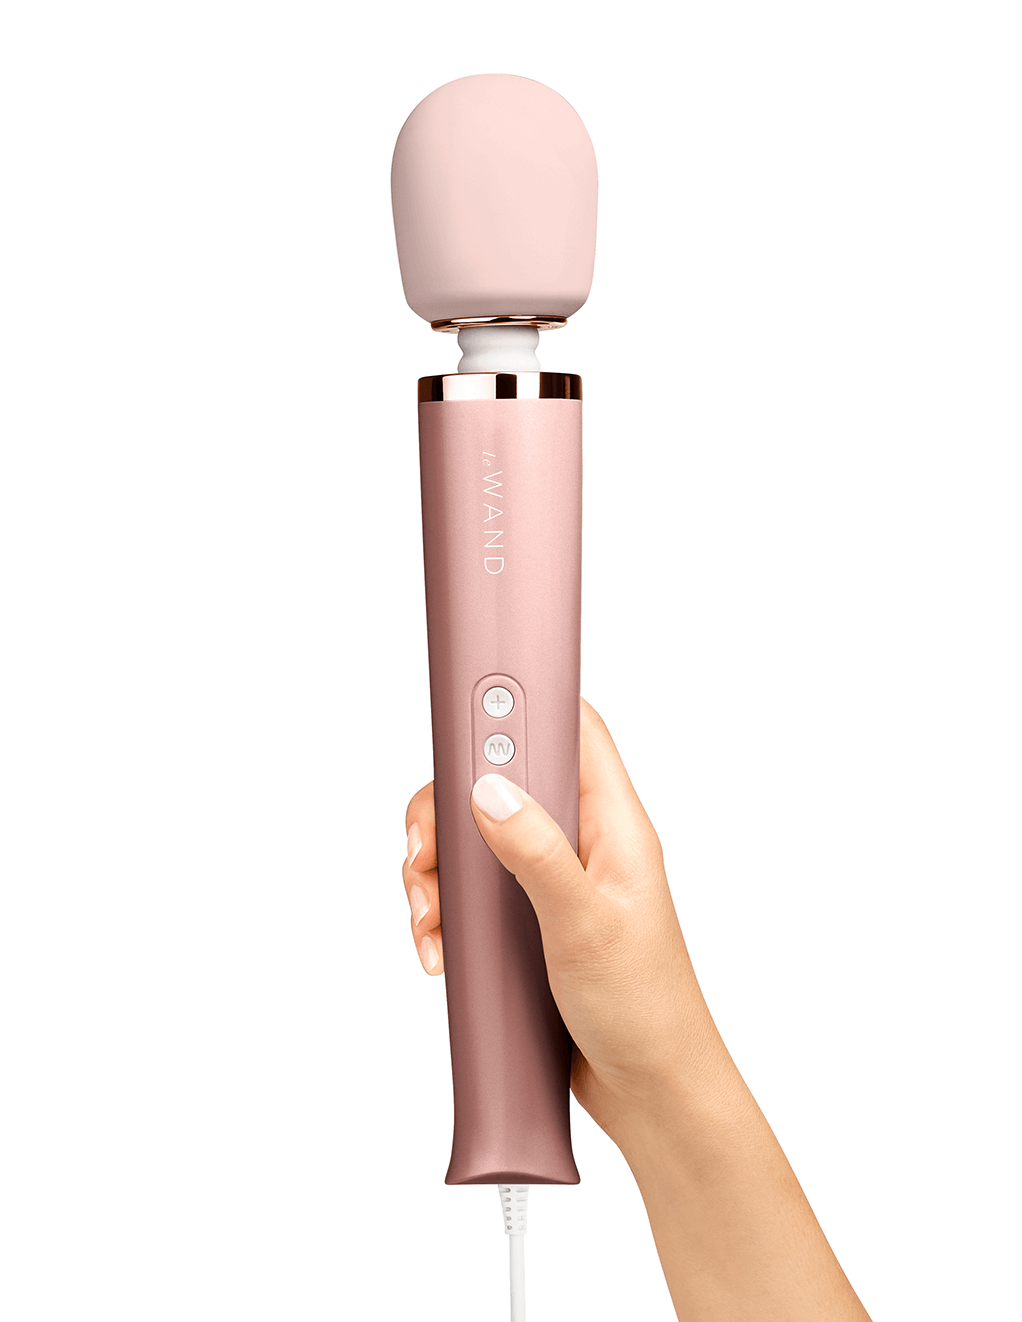 Le Wand Plug-In Wand Massager - Rose Gold